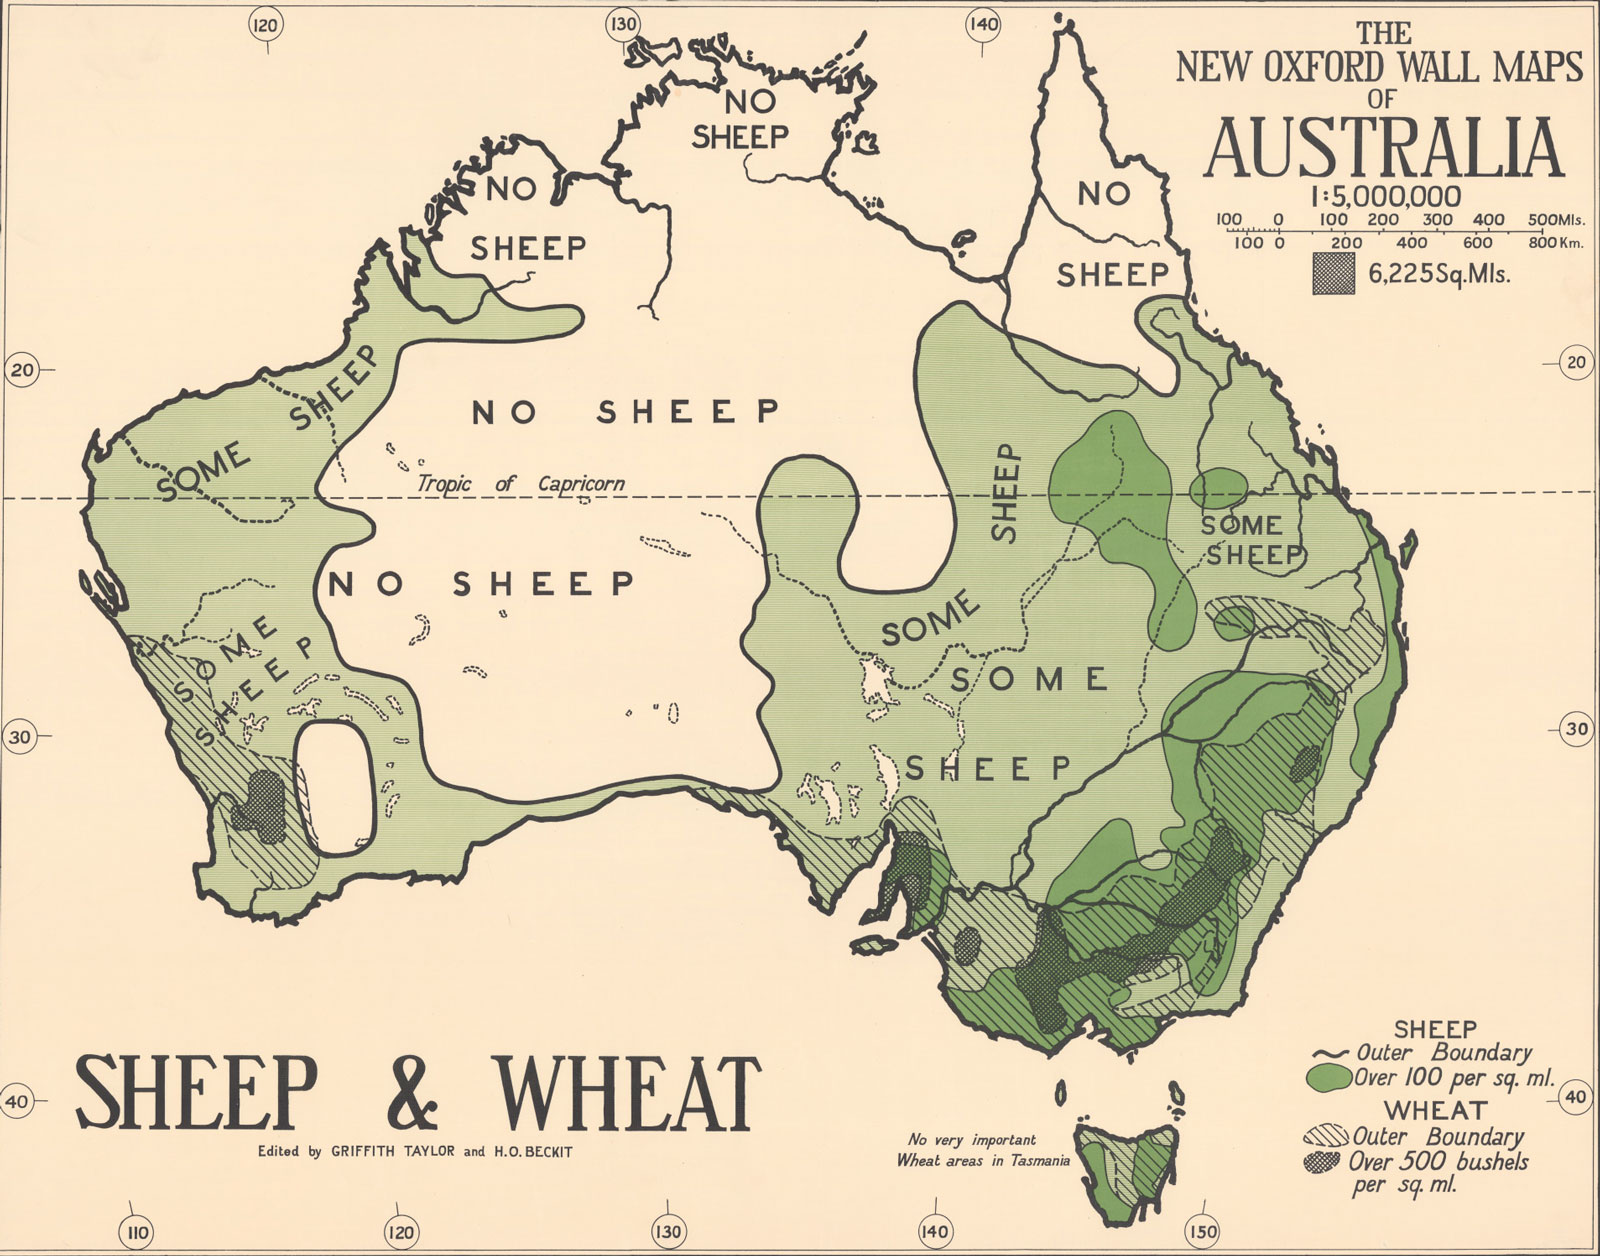 <p>A map showing sheep and wheat growing areas of Australia, published in the 1920s</p>
